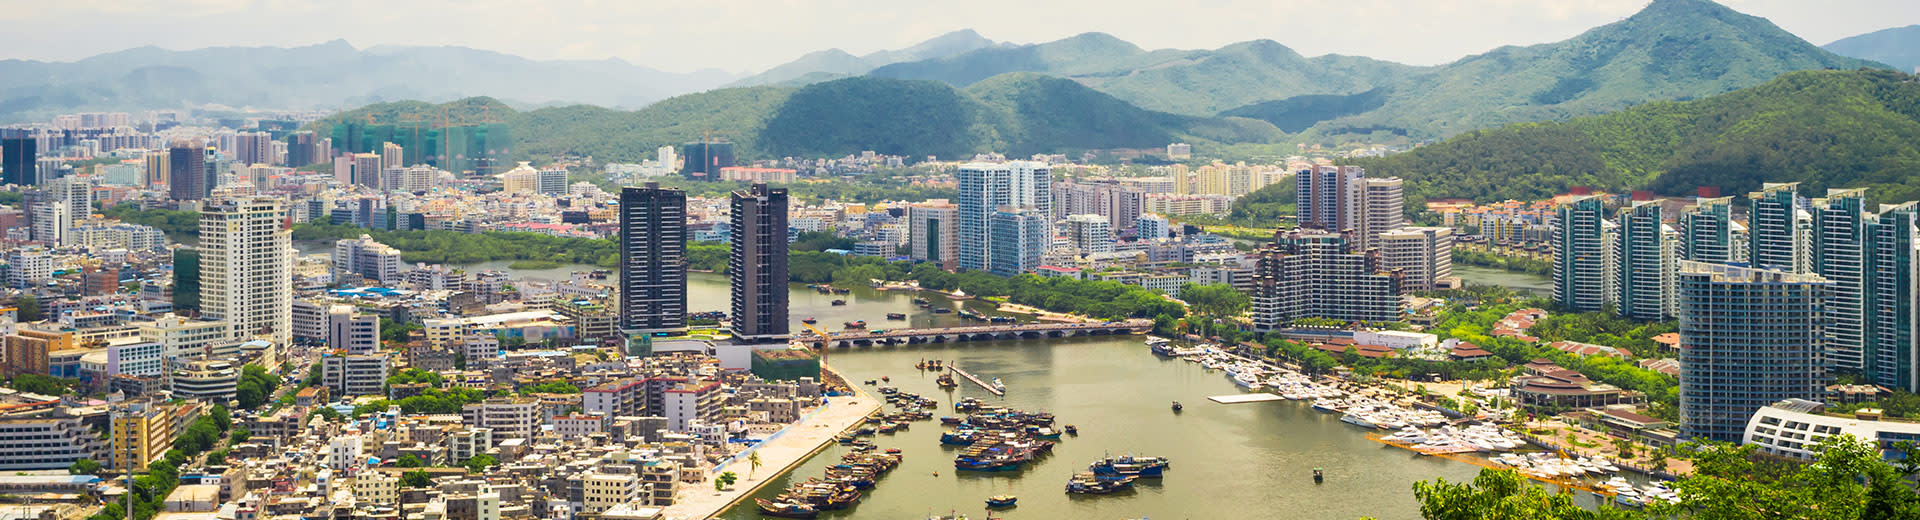 Skyscrapers and green parks dominate the aerial shot of Sanya.